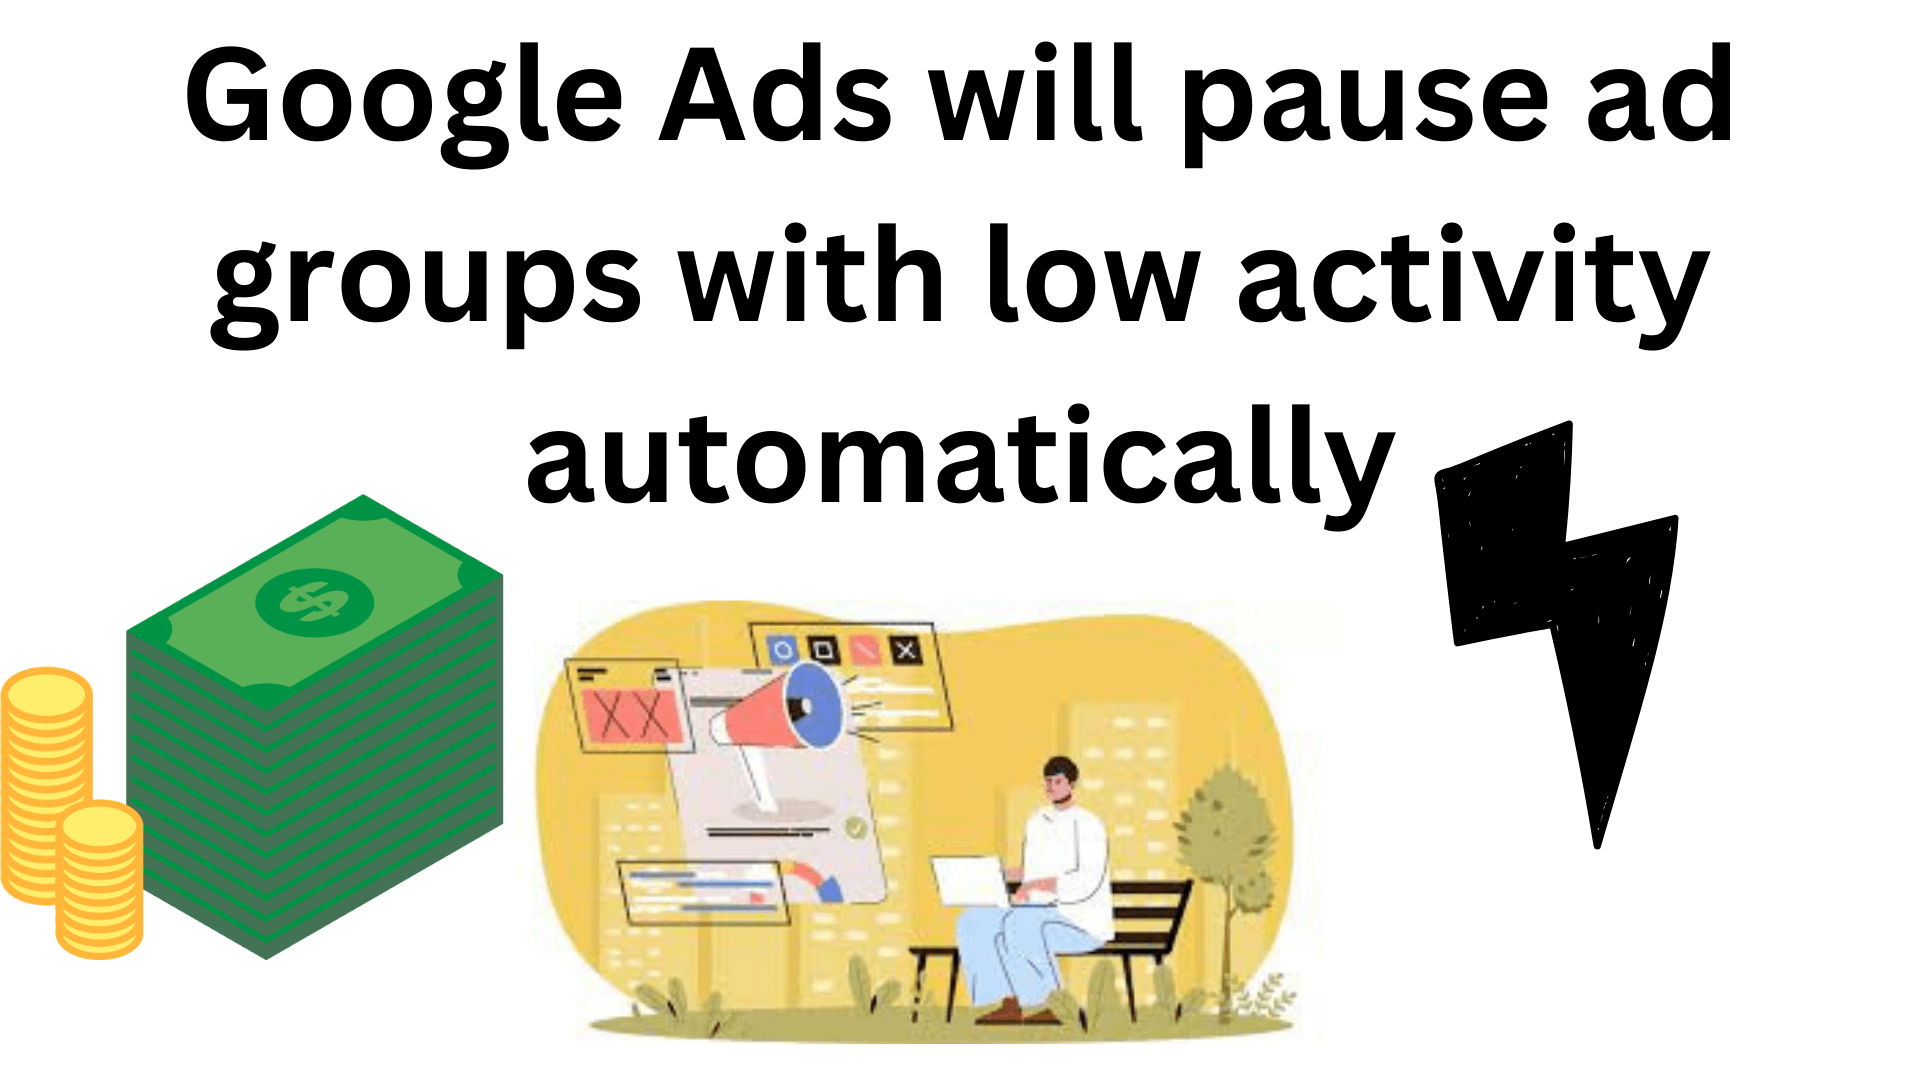 Google Ads Will Pause Ad Groups With Low Activity Automatically